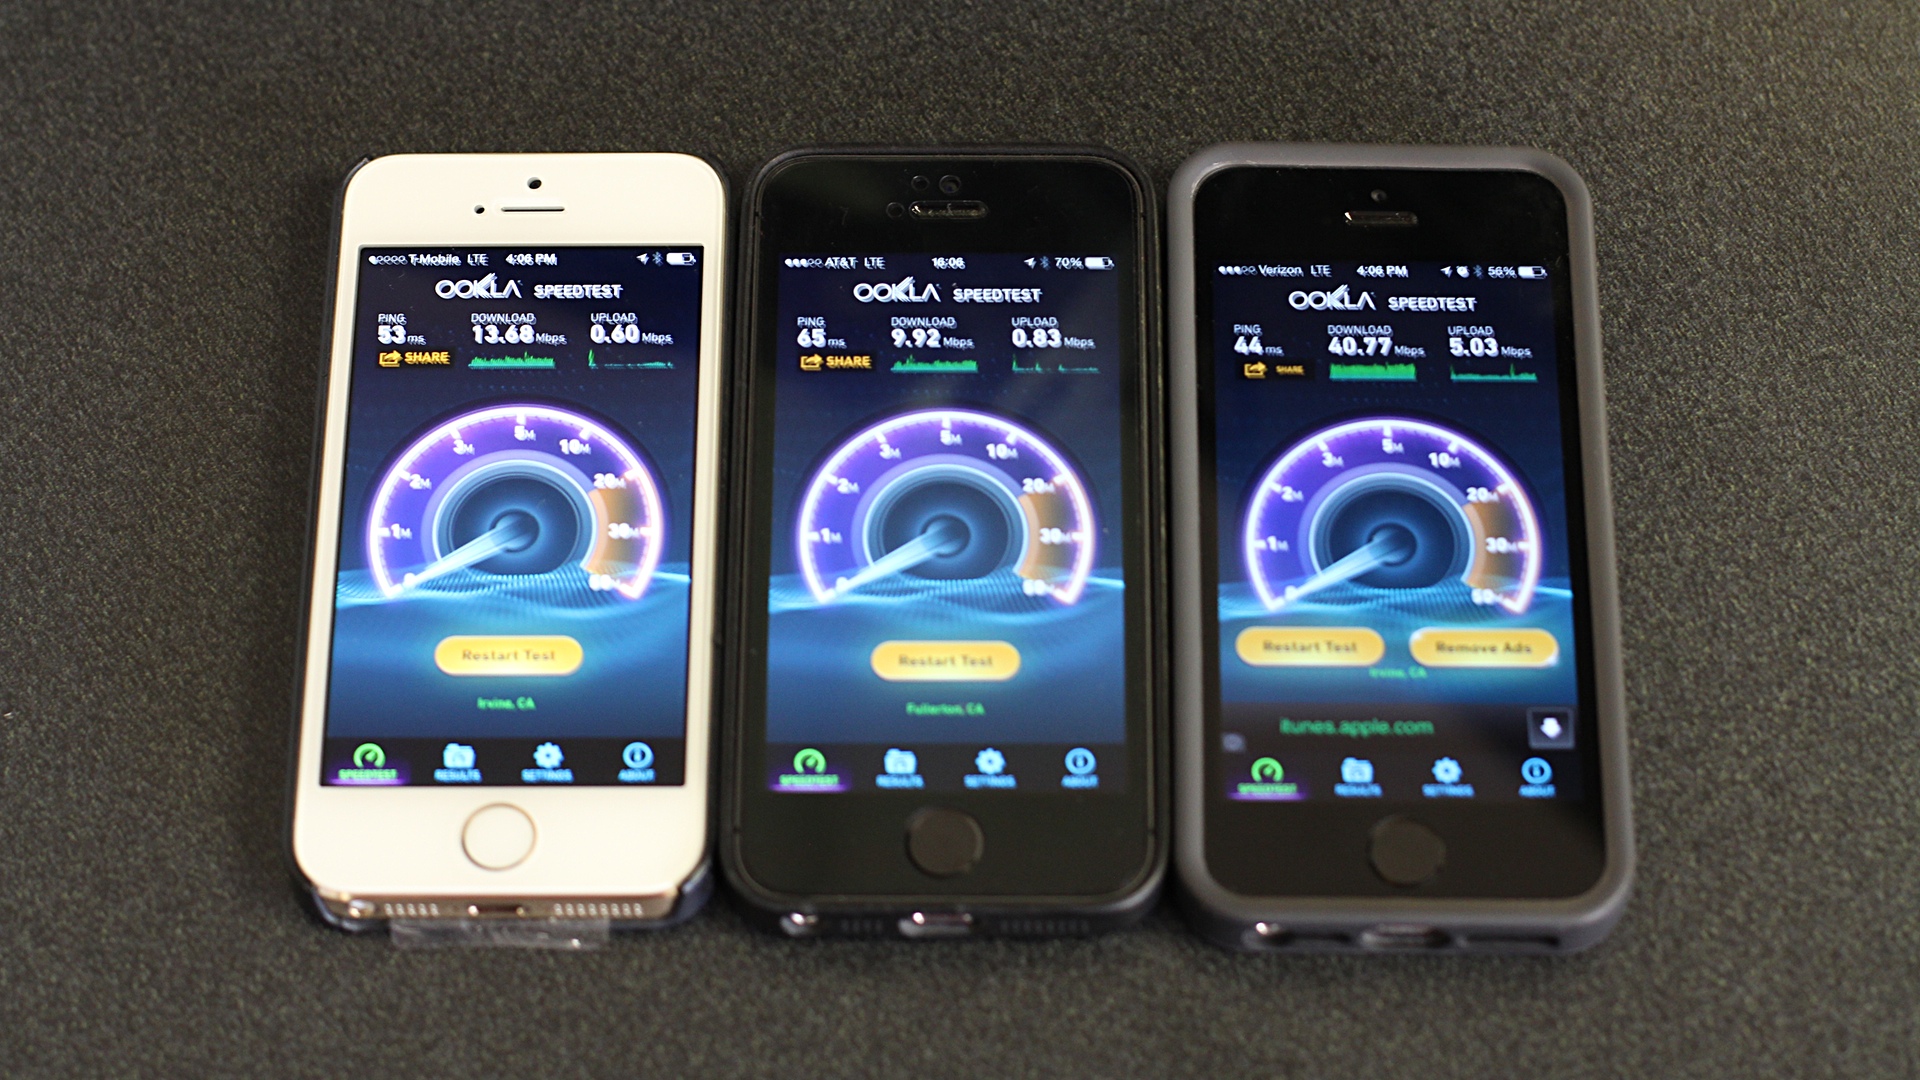 iPhone 5s on T-Mobile, AT&T, and Verizon